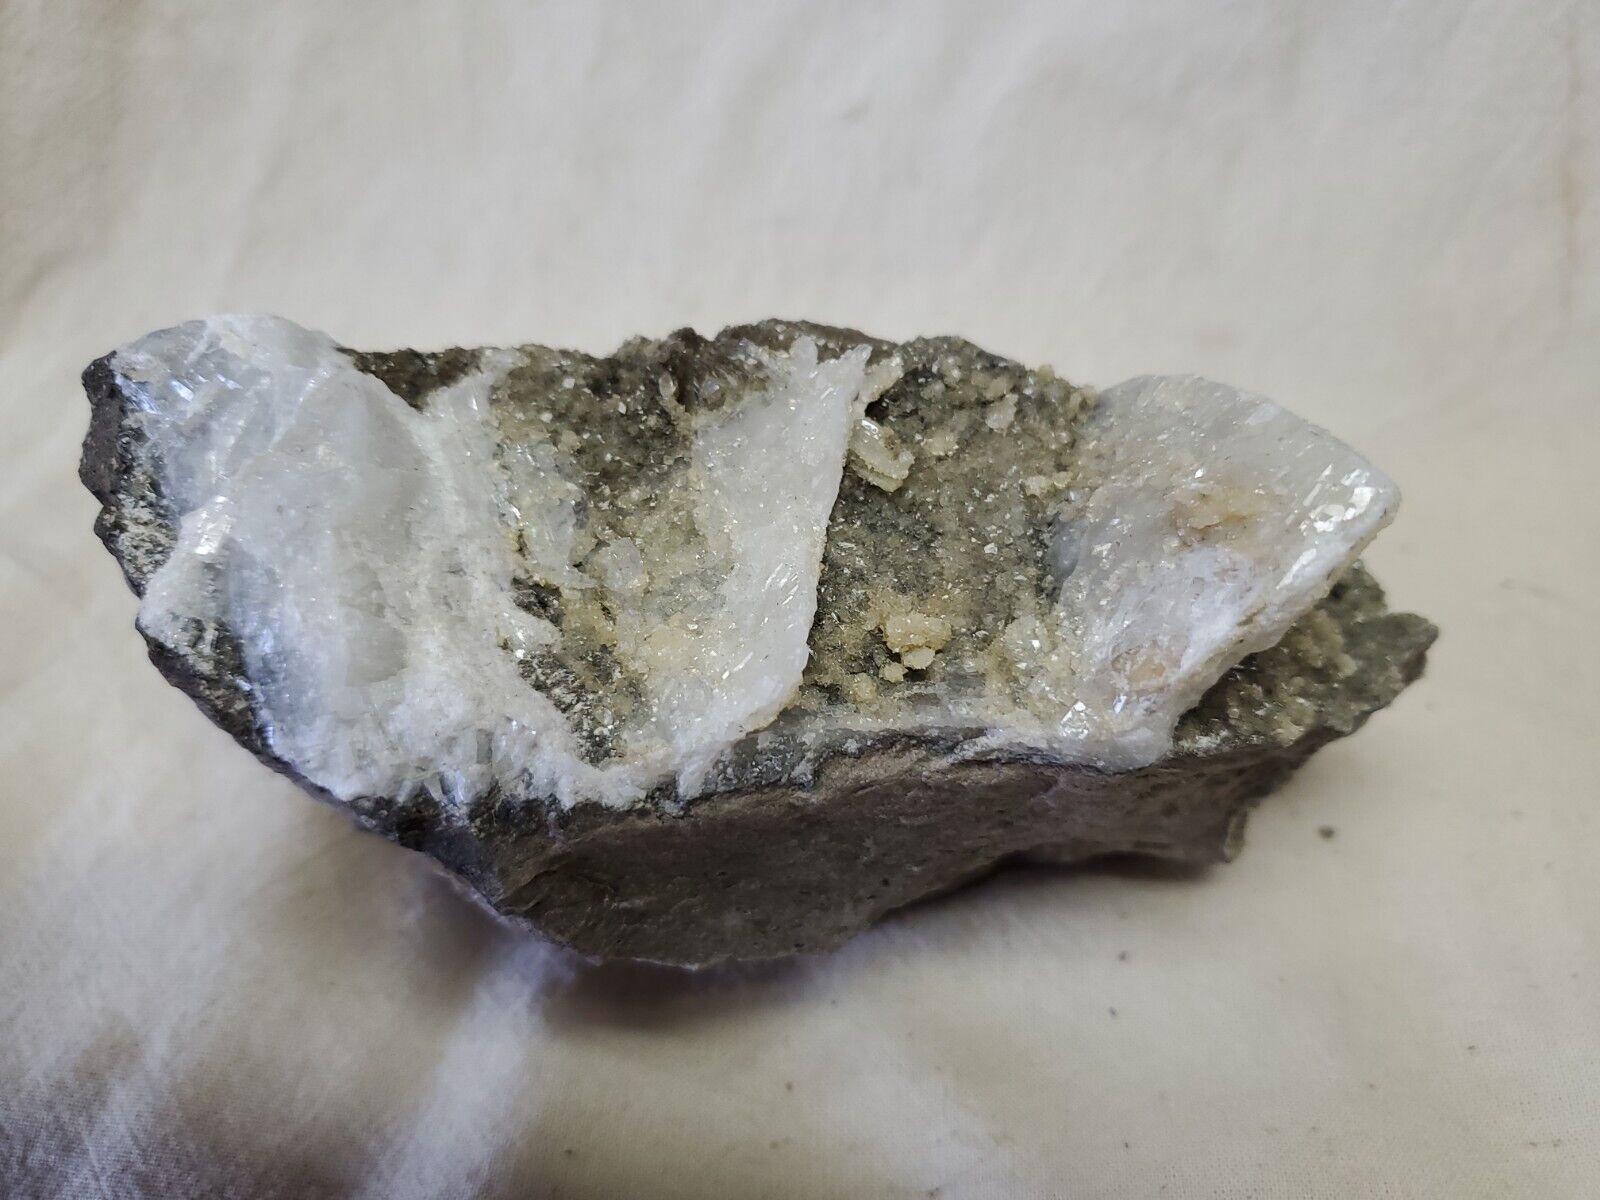 Celestite & Dogtooth Calcite Crystals on Matrix from South Rockwood MI